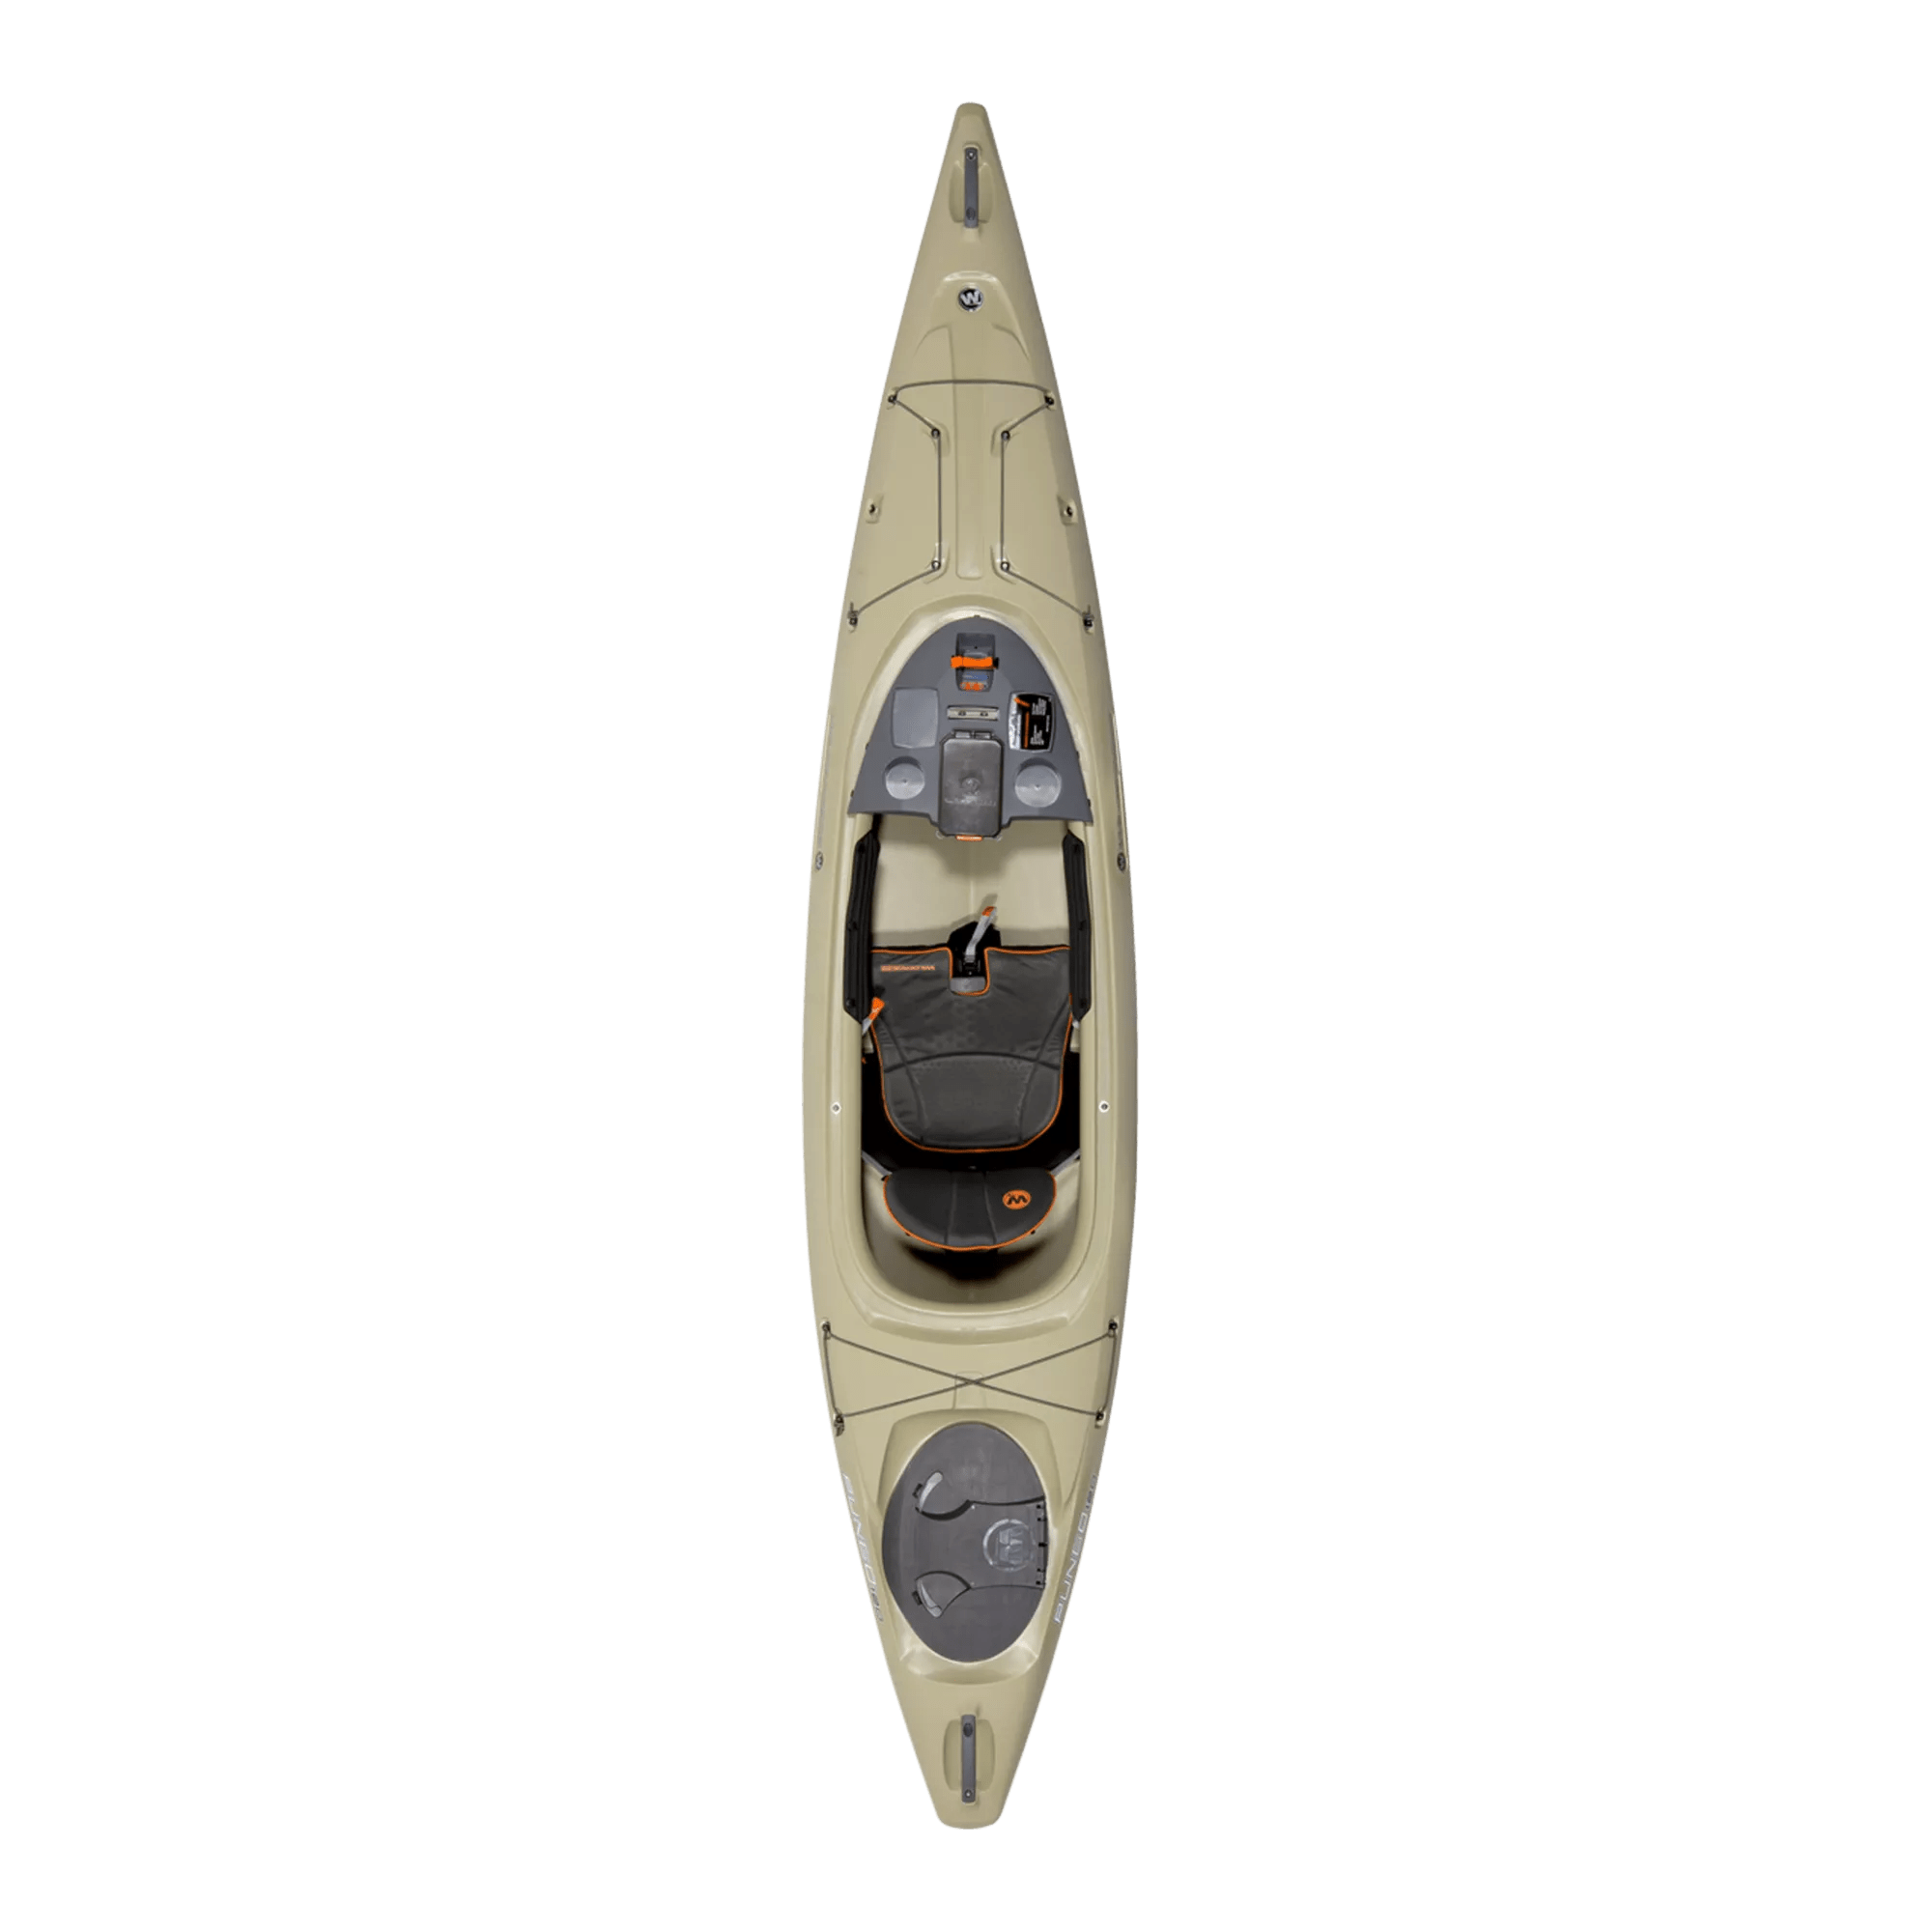 WILDERNESS SYSTEMS - Pungo 120 Recreational Kayak - Discontinued color/model - Beige - 9730509181 - TOP 